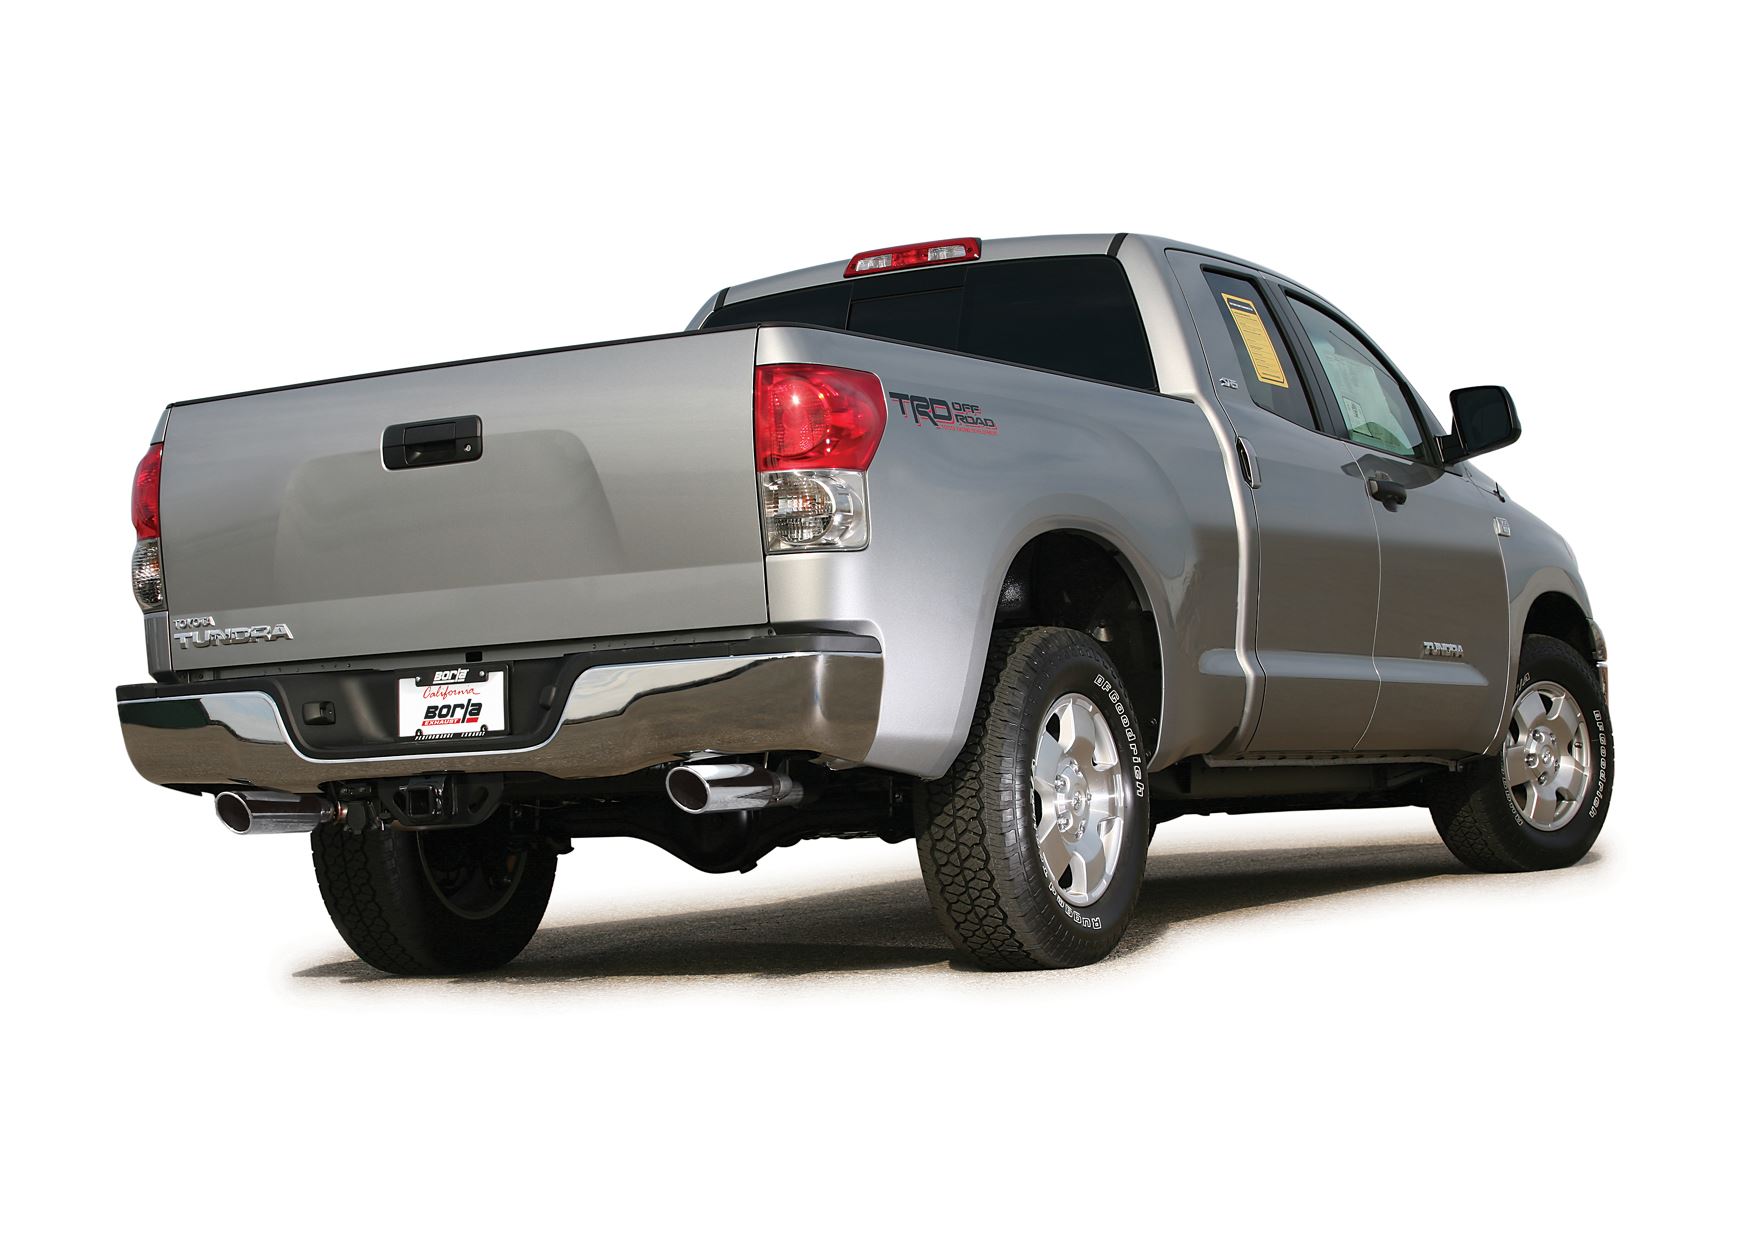 Best Exhaust - Borla Cat-Back rear exit suitable for Toyota Tundra 2007